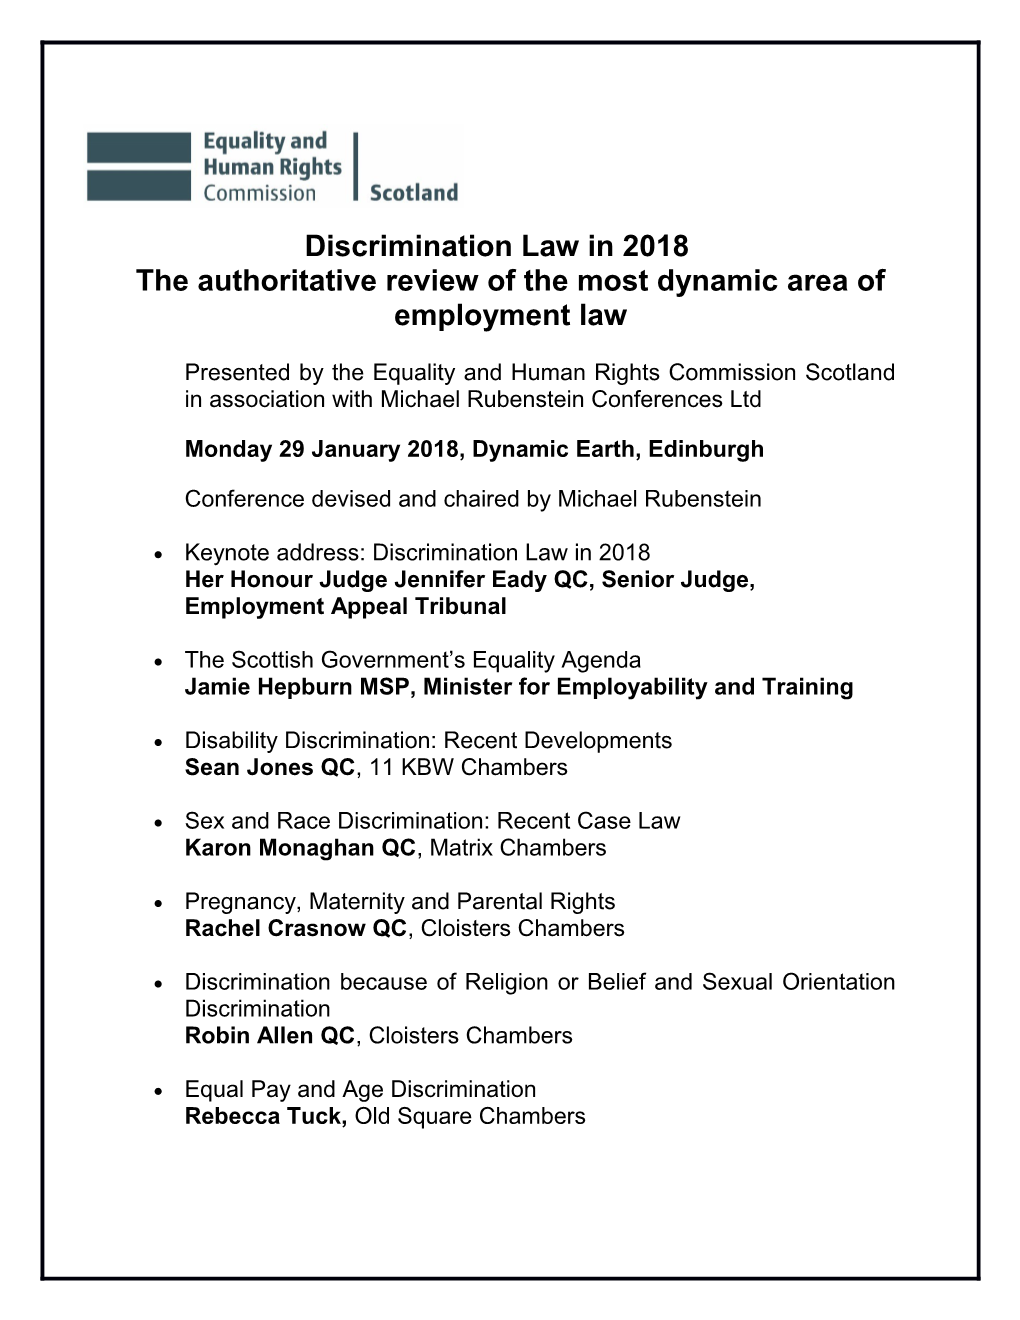 The Authoritative Review of the Most Dynamic Area of Employment Law